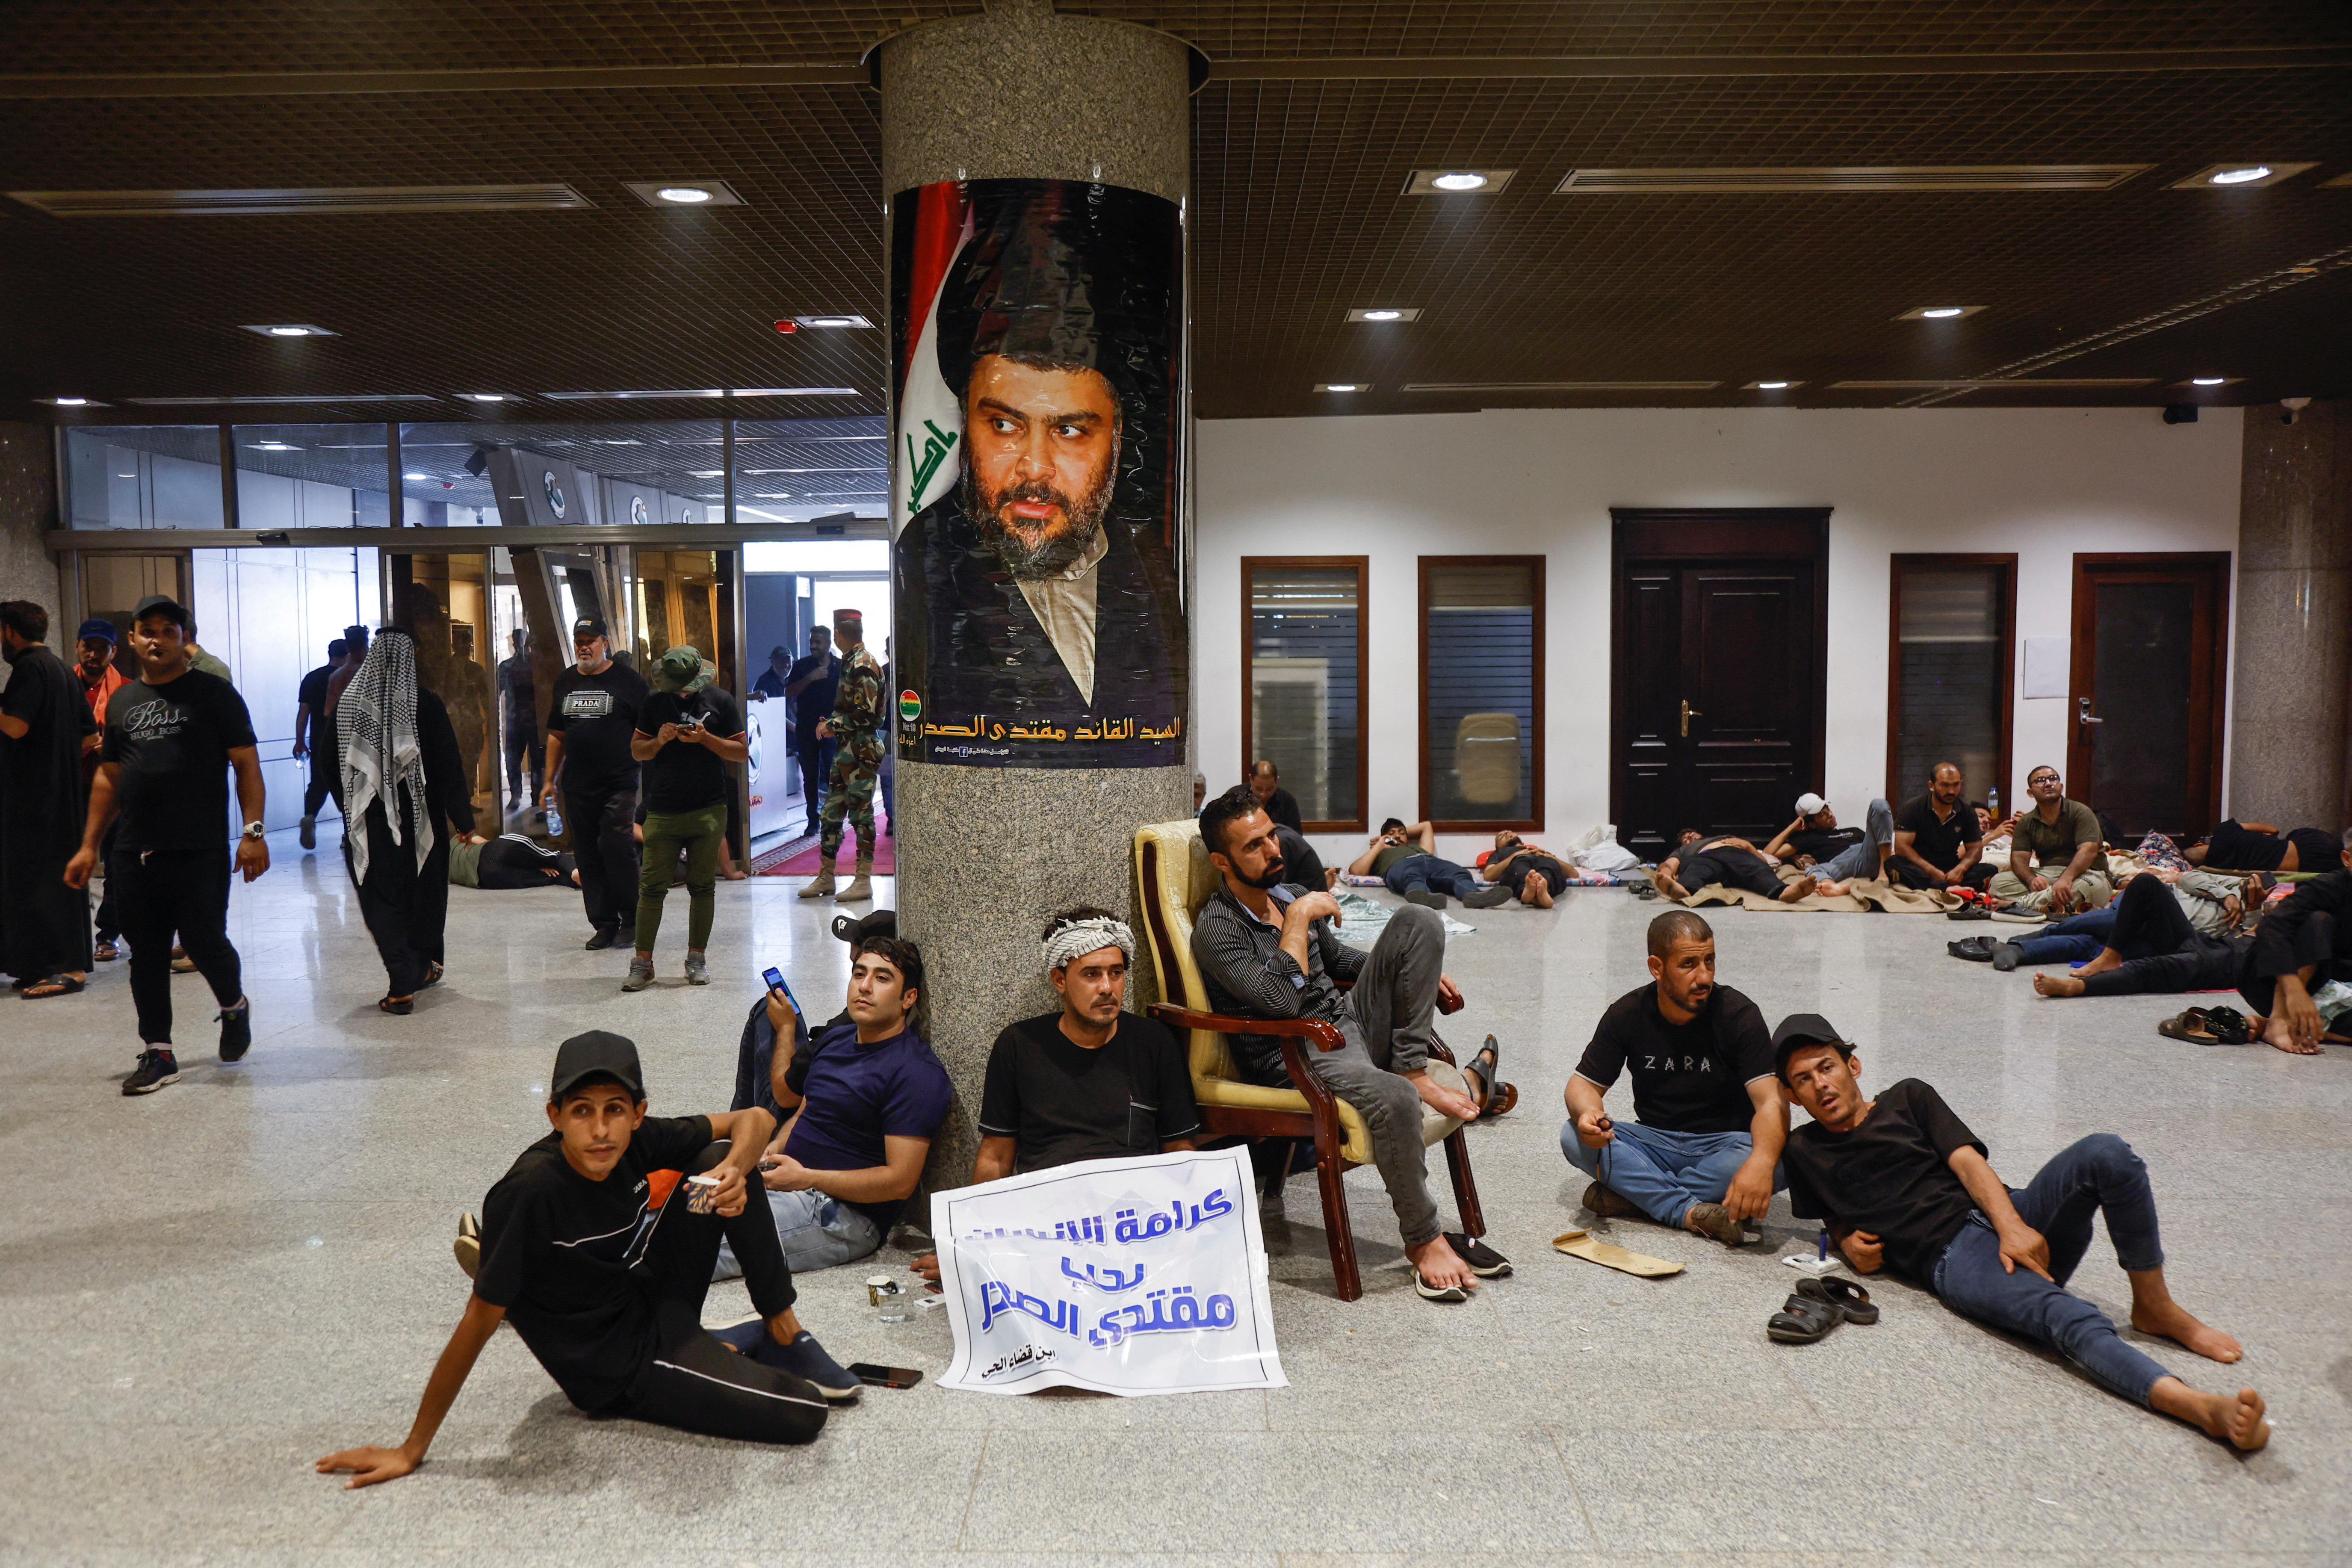 Supporters of Iraqi populist leader al-Sadr gather for a sit-in at the parliament building in Baghdad